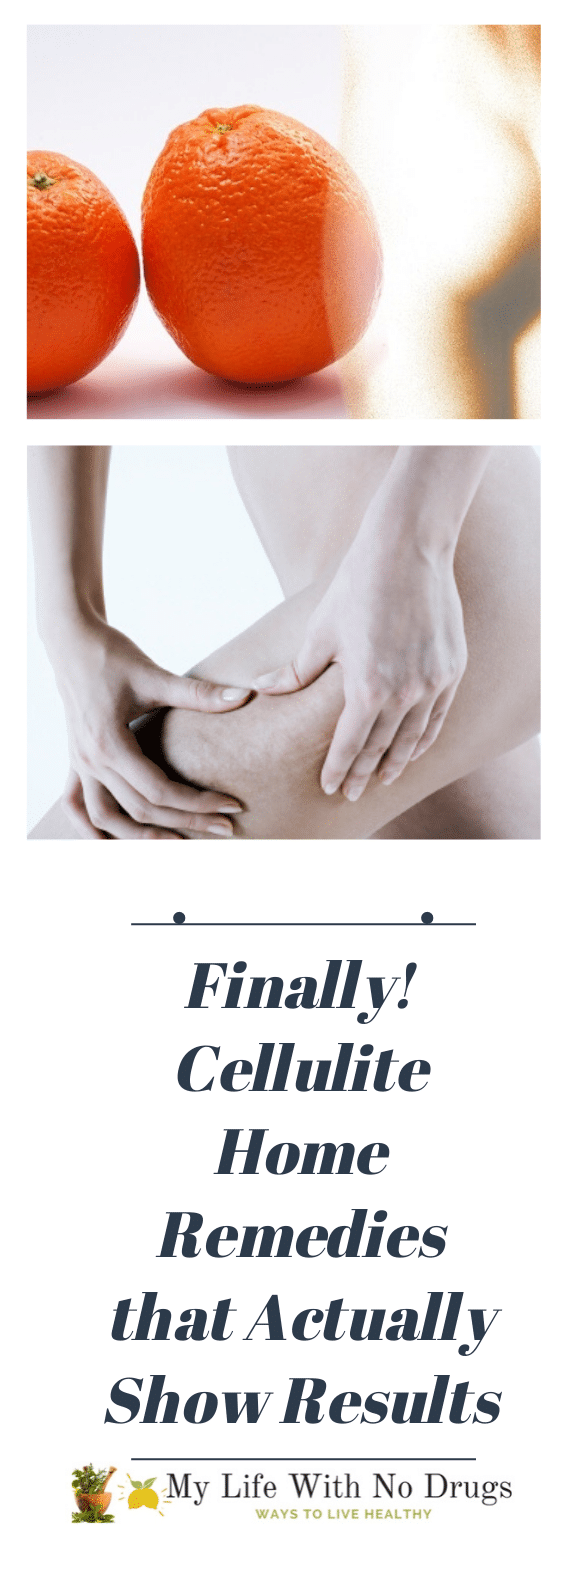 Finally! Cellulite Home Remedies that Actually Show Results